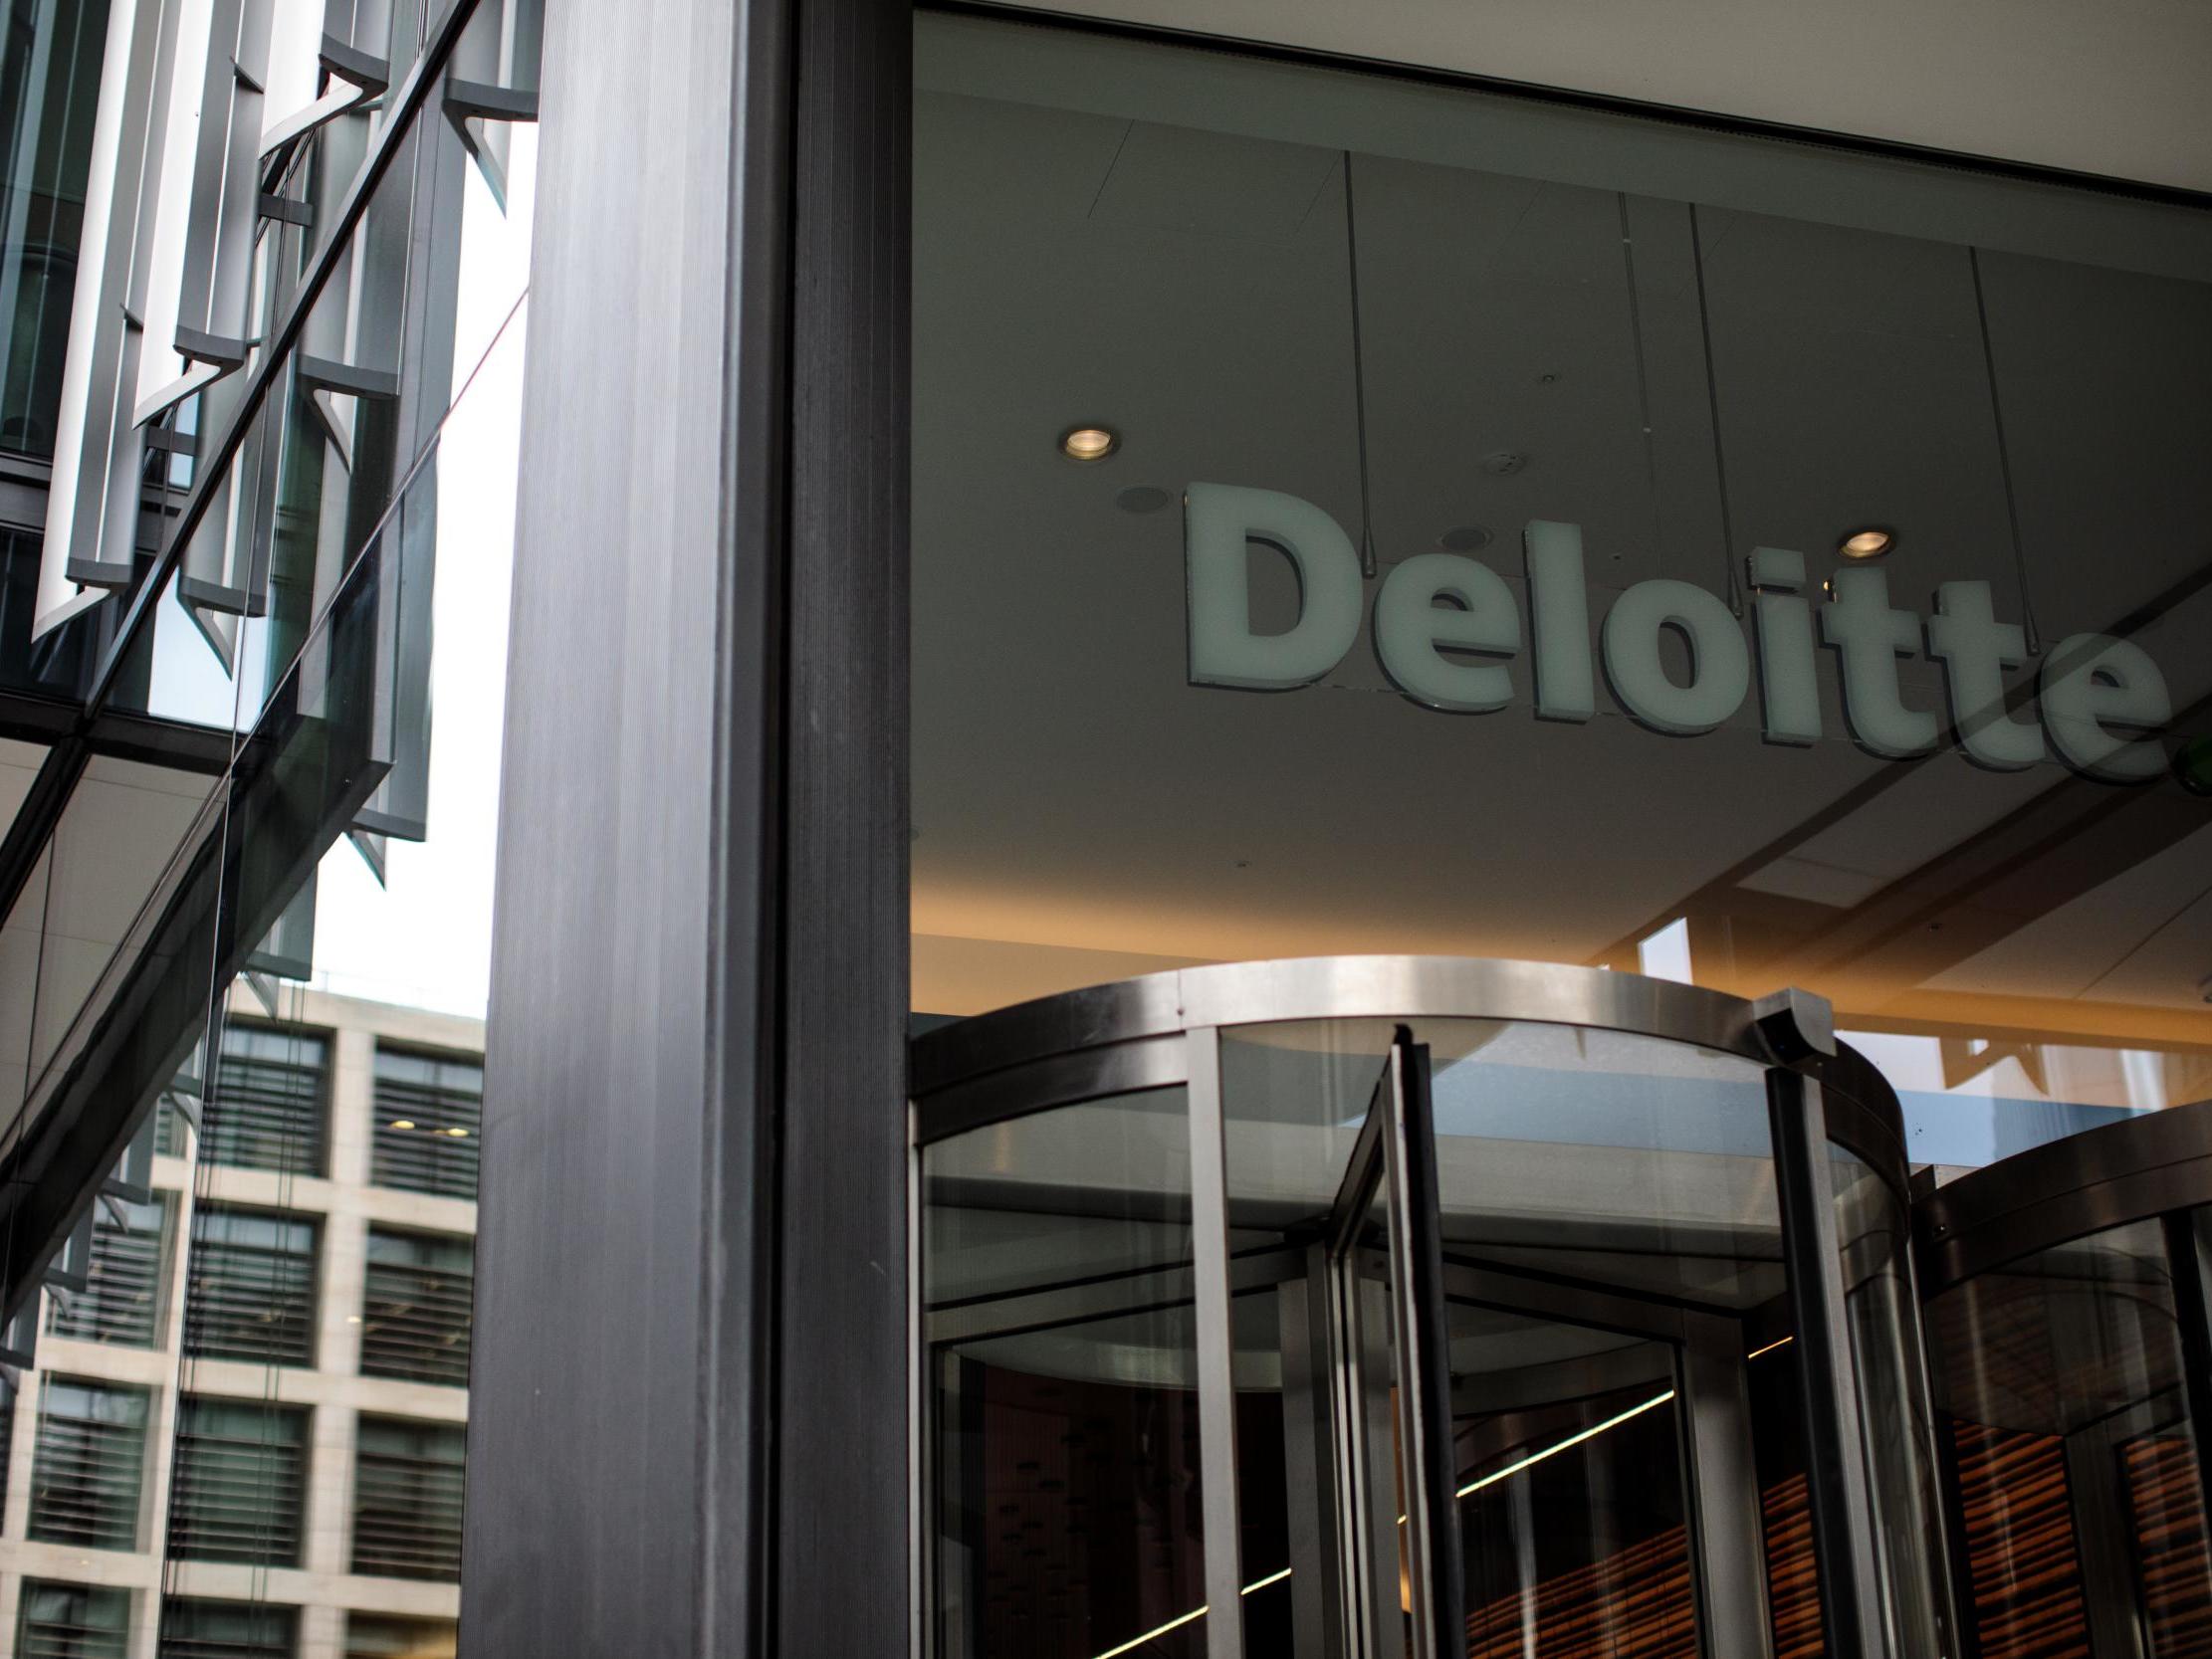 Deloitte has been fined following admissions of misconduct during an audit of Serco over the electronic tagging scandal